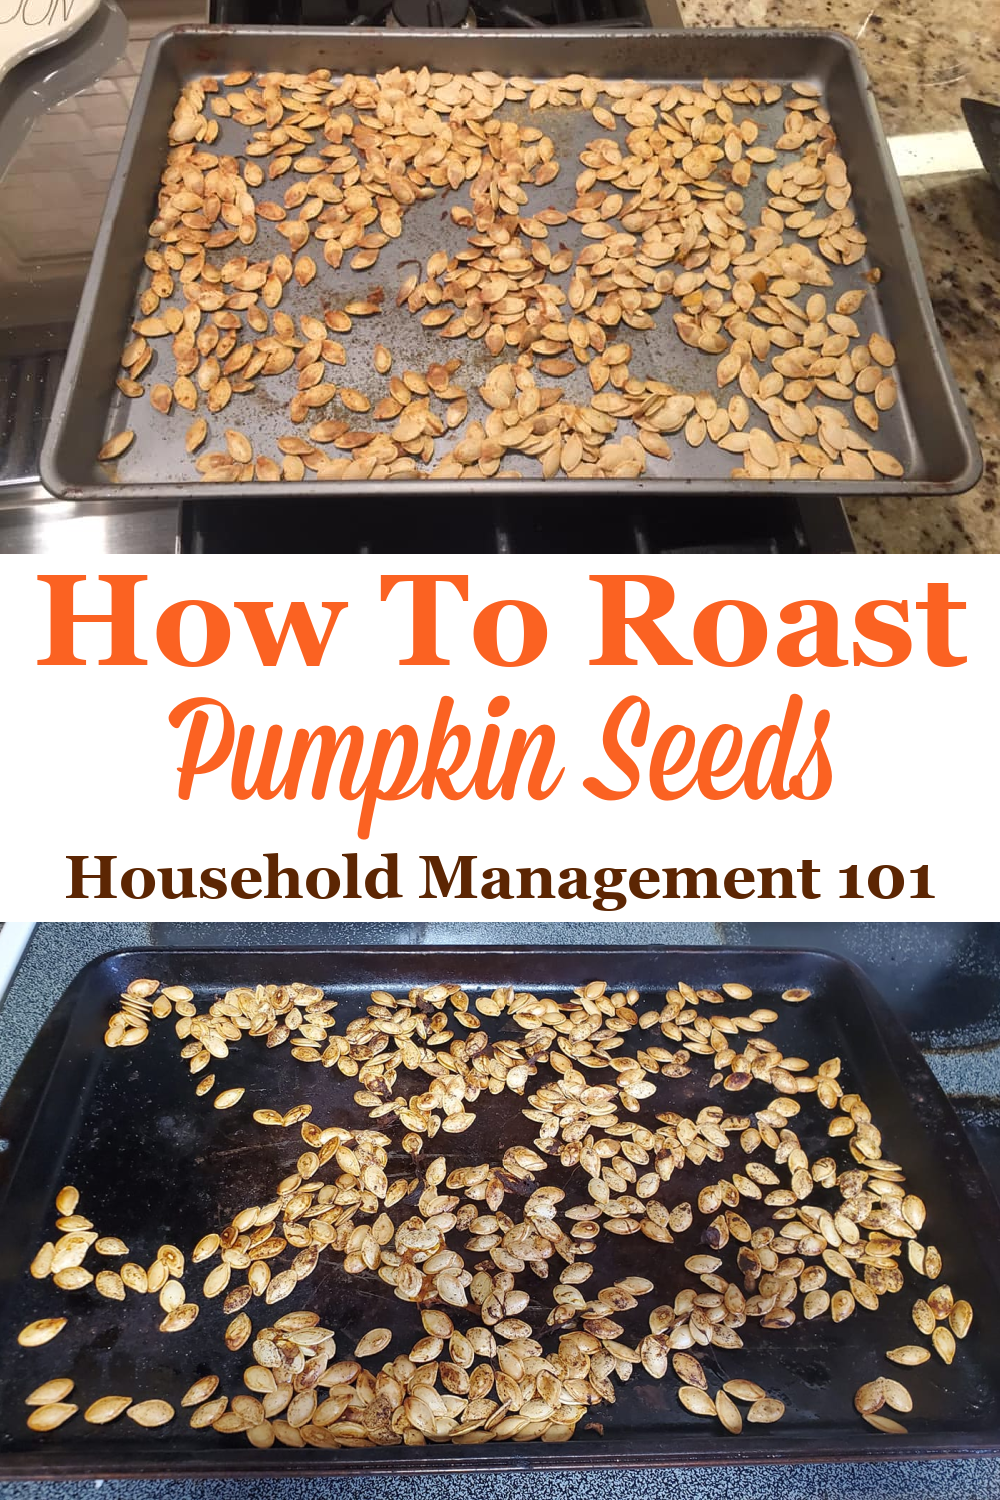 How to roast pumpkin seeds this Halloween when carving your pumpkin {on Household Management 101}